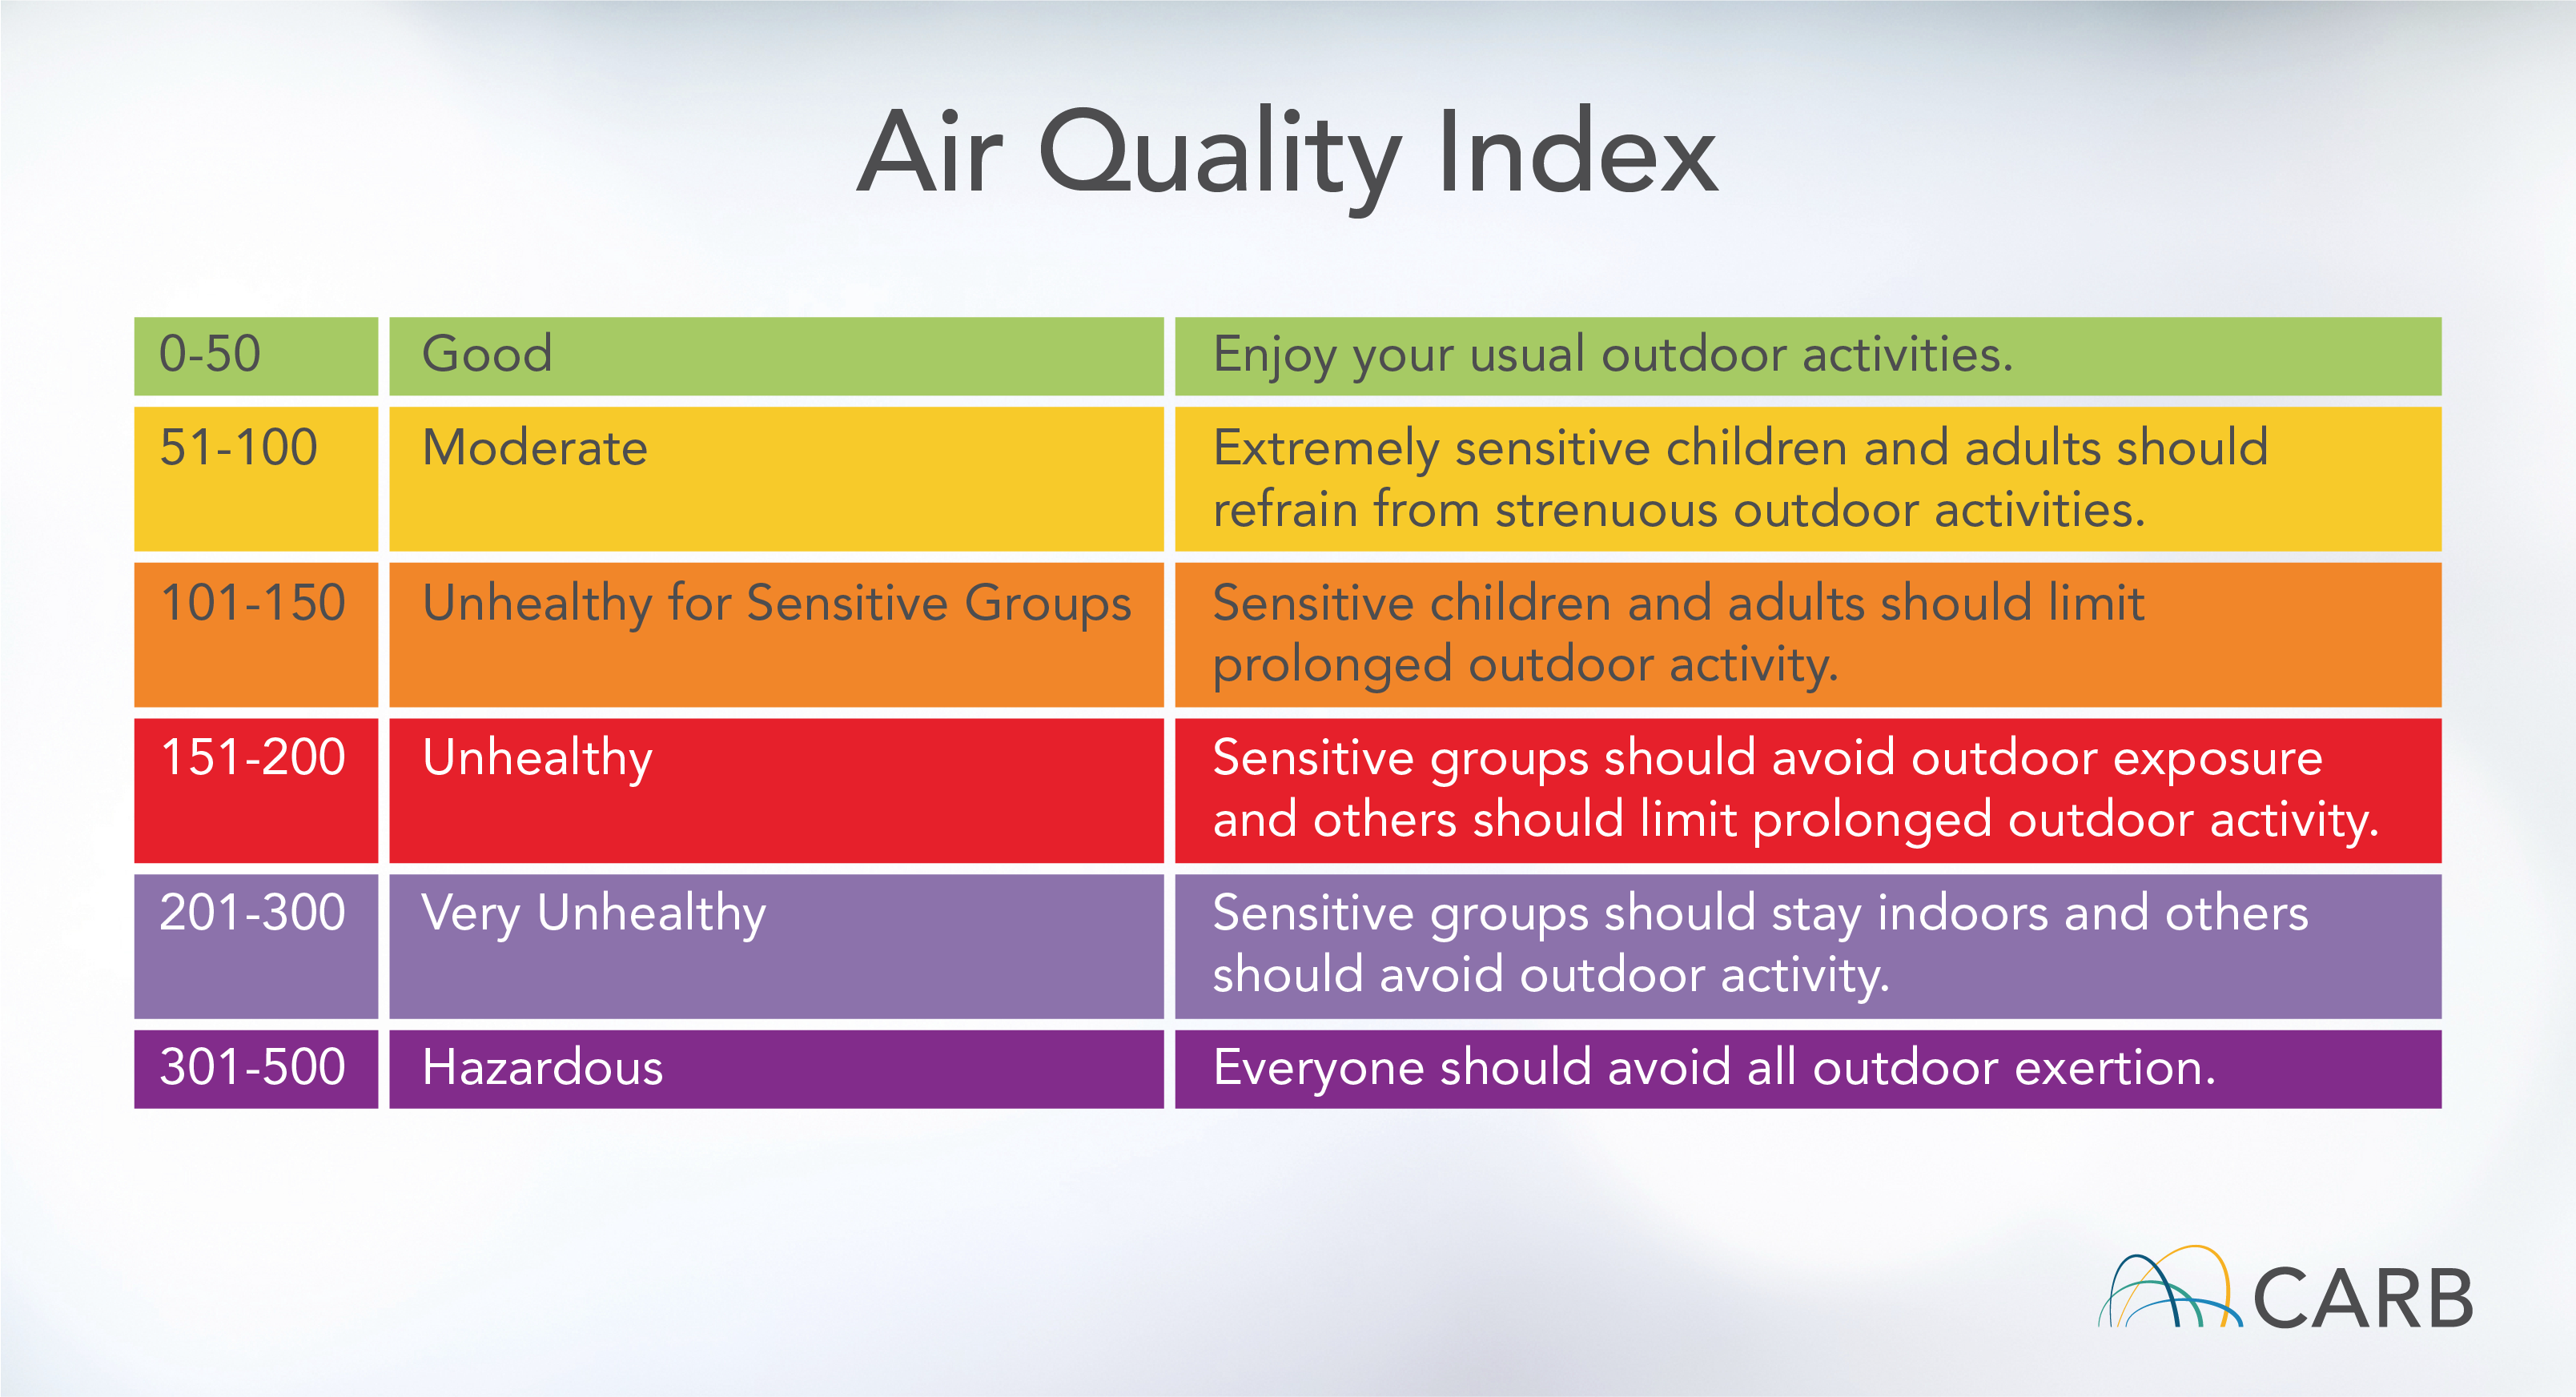 Air Quality Index: 0-50, Good: Enjoy your usual outdoor activities. 51-100, Moderate: Extremely sensitive children and adults should refrain from strenuous outdoor activities. 101-150, Unhealthy for Sensitive Groups: Sensitive children and adults should limit prolonged outdoor activity. 151-200, Unhealthy: Sensitive groups should avoid outdoor exposure and others should limit prolonged outdoor activity. 201-300, Very Unhealthy: Sensitive groups should stay indoors and others should avoid outdoor activity. 301-500, Hazardous: Everyone should avoid all outdoor exertion. 